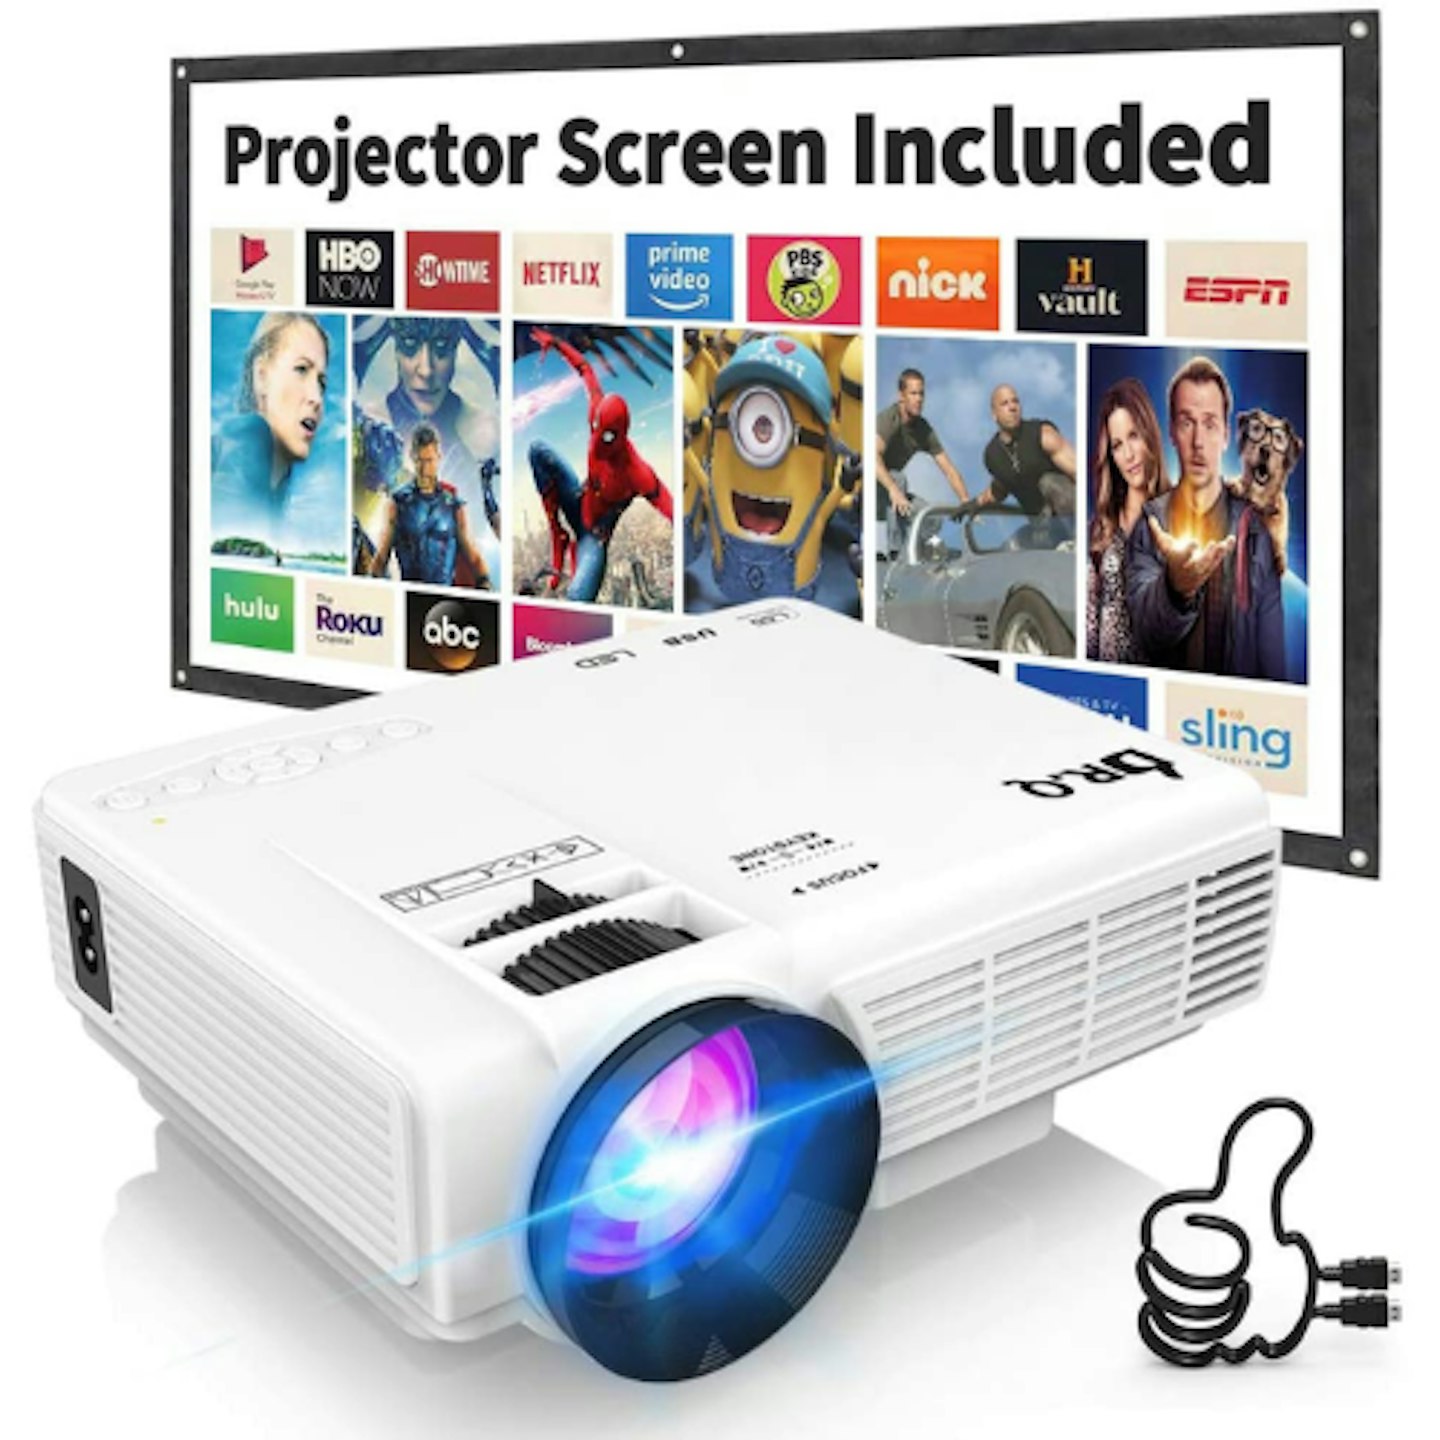 DR. Q HI-04 Projector with Projection Screen